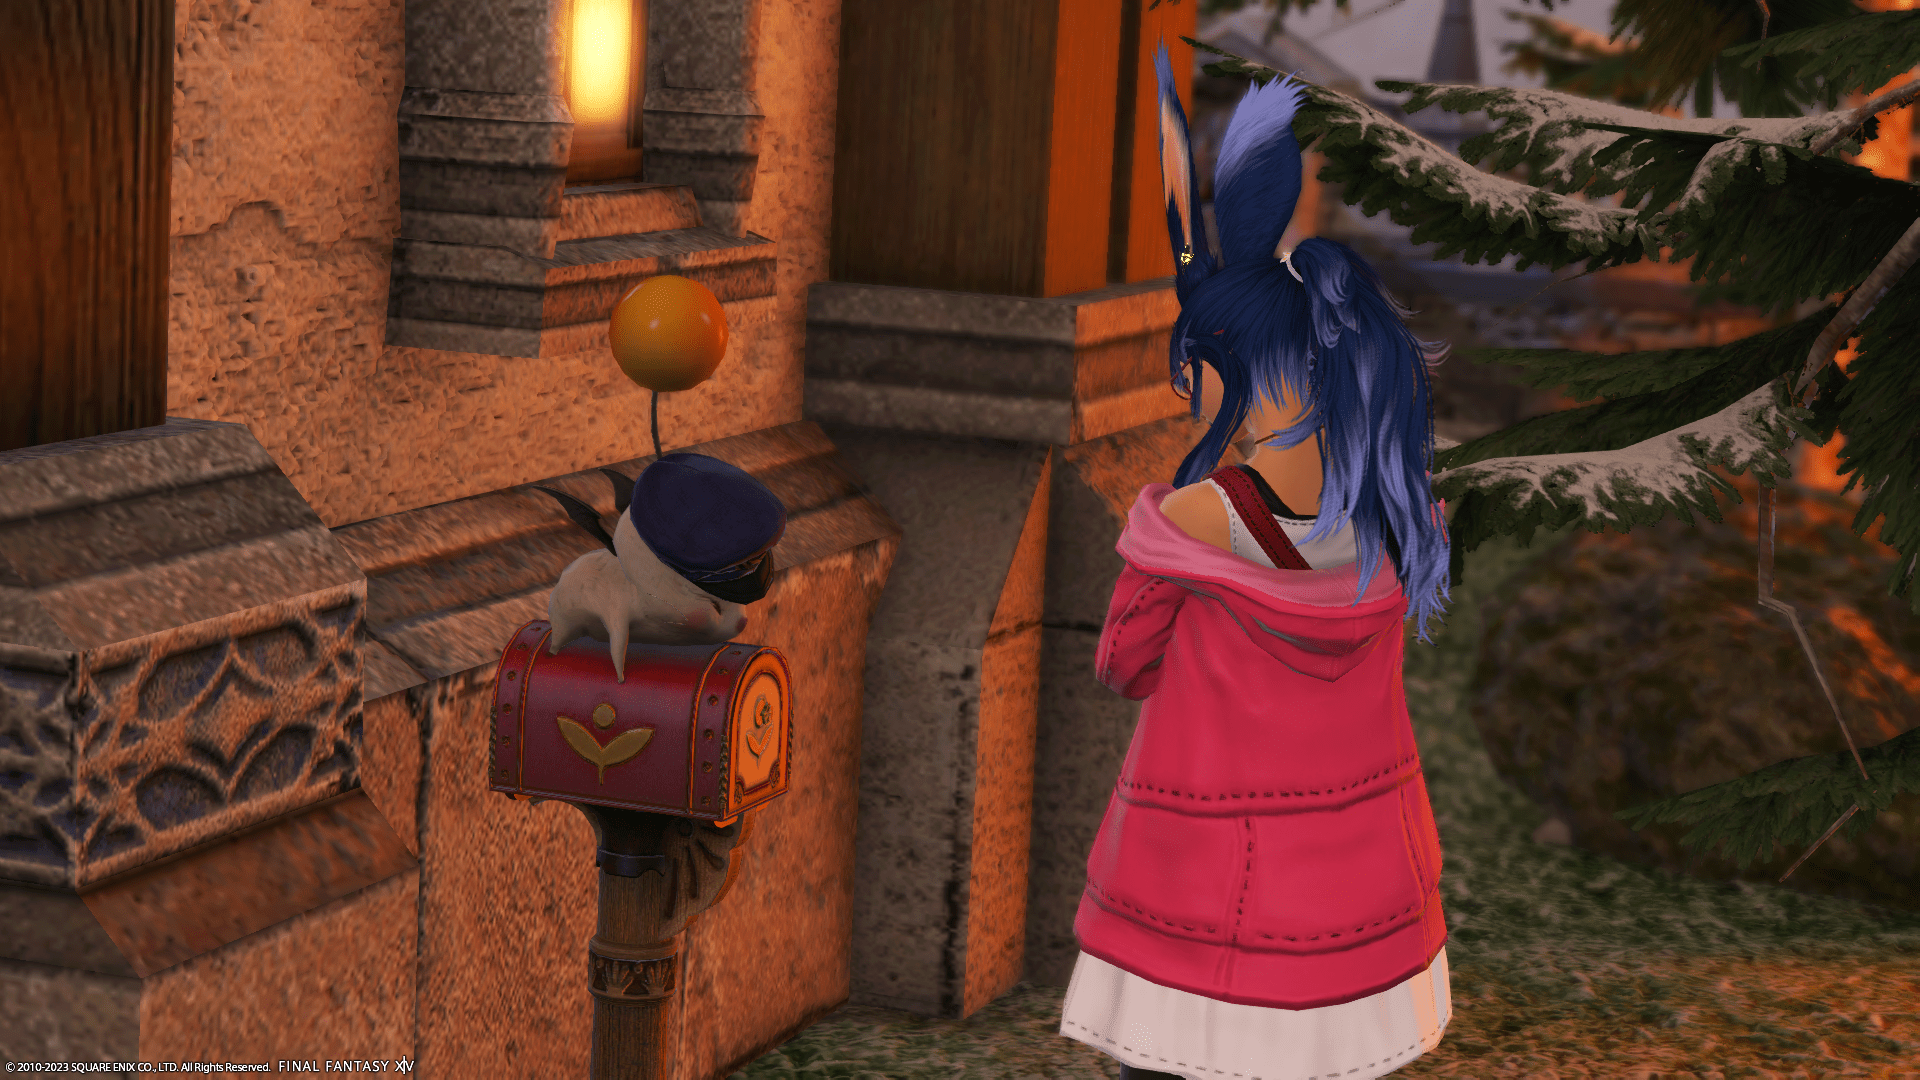 Me in a pink hoodie looking at a moogle mailbox in Final Fantasy XIV.